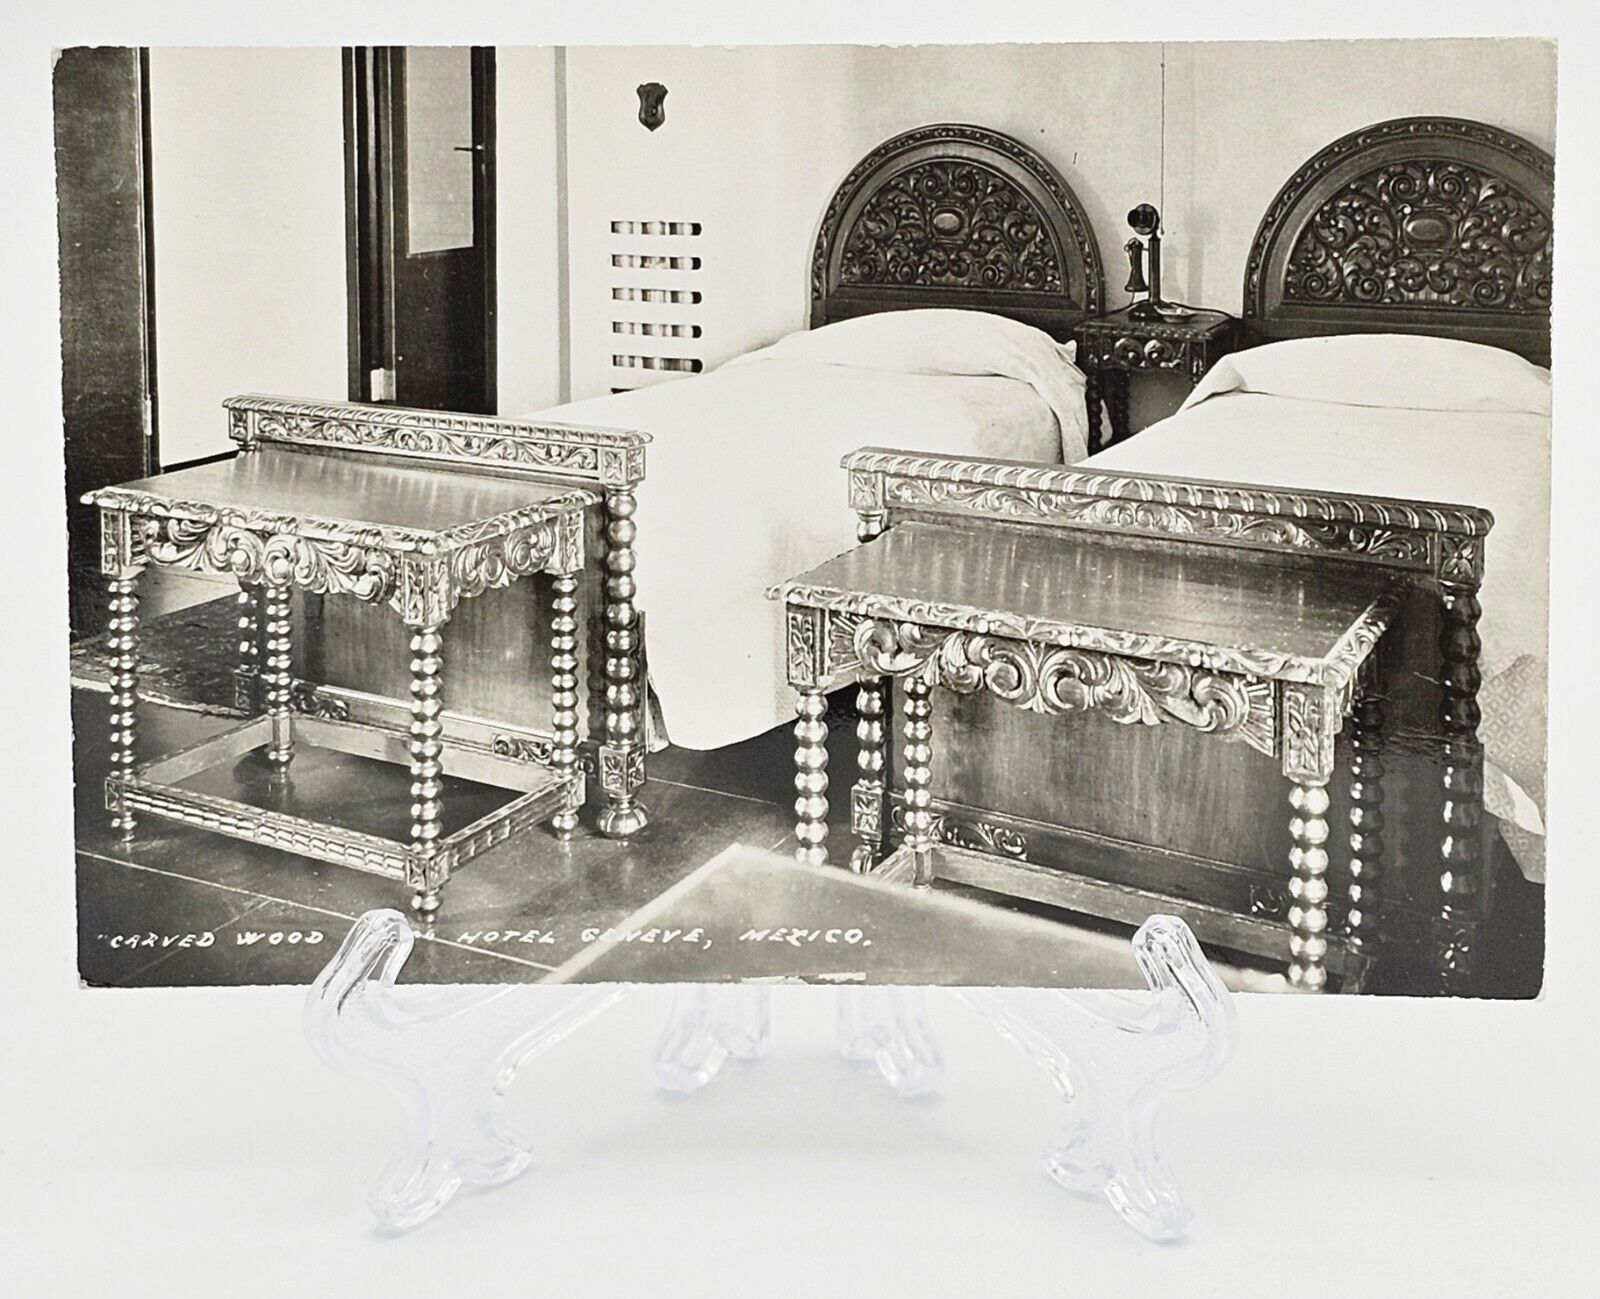 RPPC Postcard~ Carved Wood Beds~ Hotel Geneve~ Mexico City, Mexico